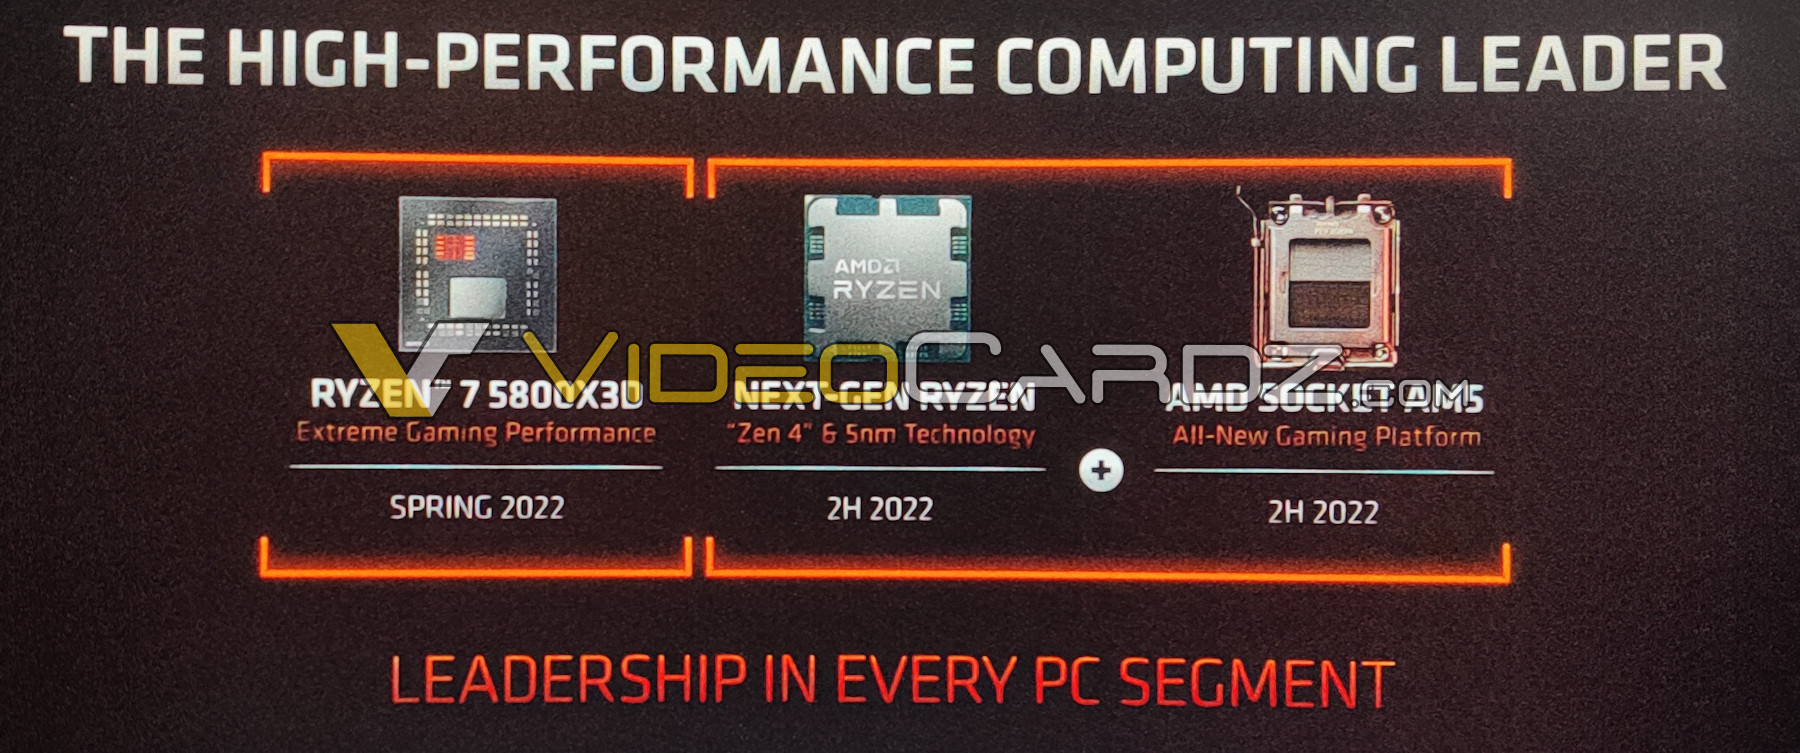 AMD Ryzen 7 5800X3D Review - The Magic of 3D V-Cache - Performance